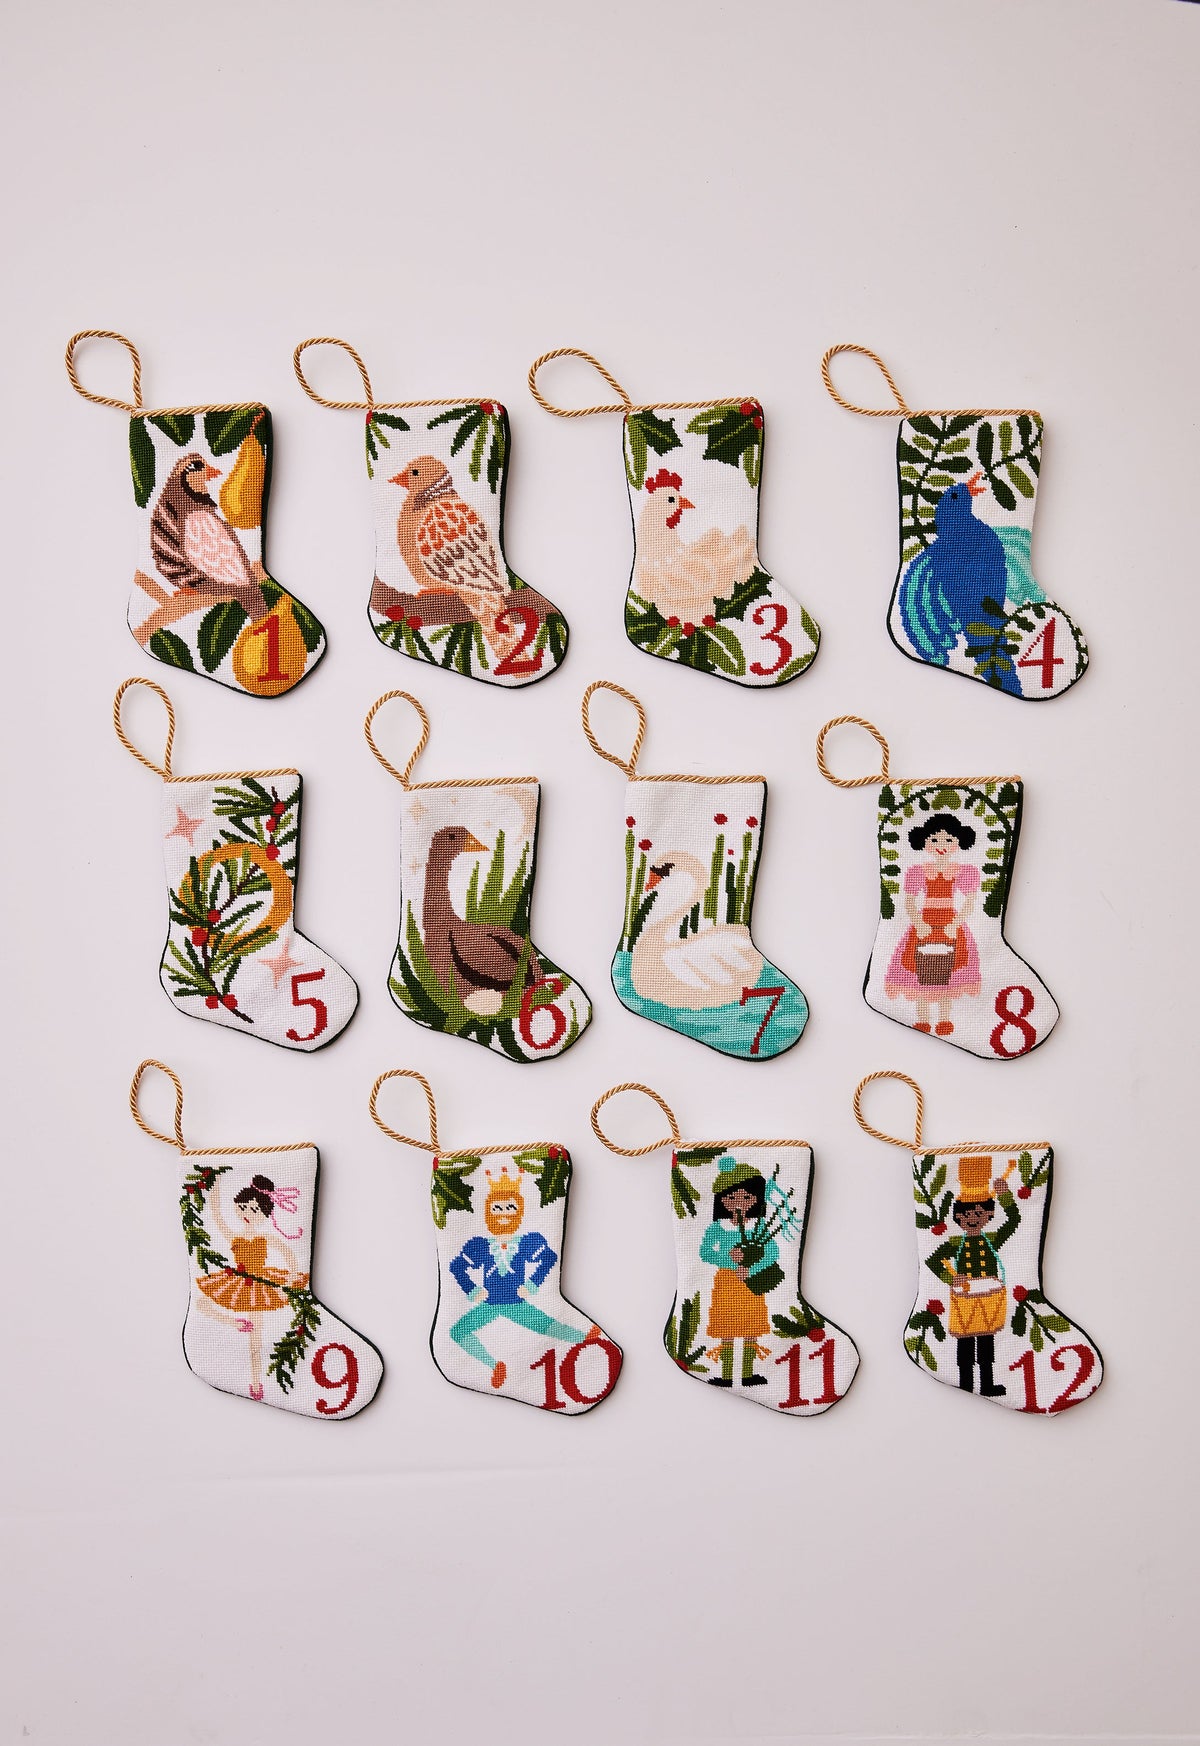 12 Days of Christmas Bauble Stocking, 9 Ladies Dancing